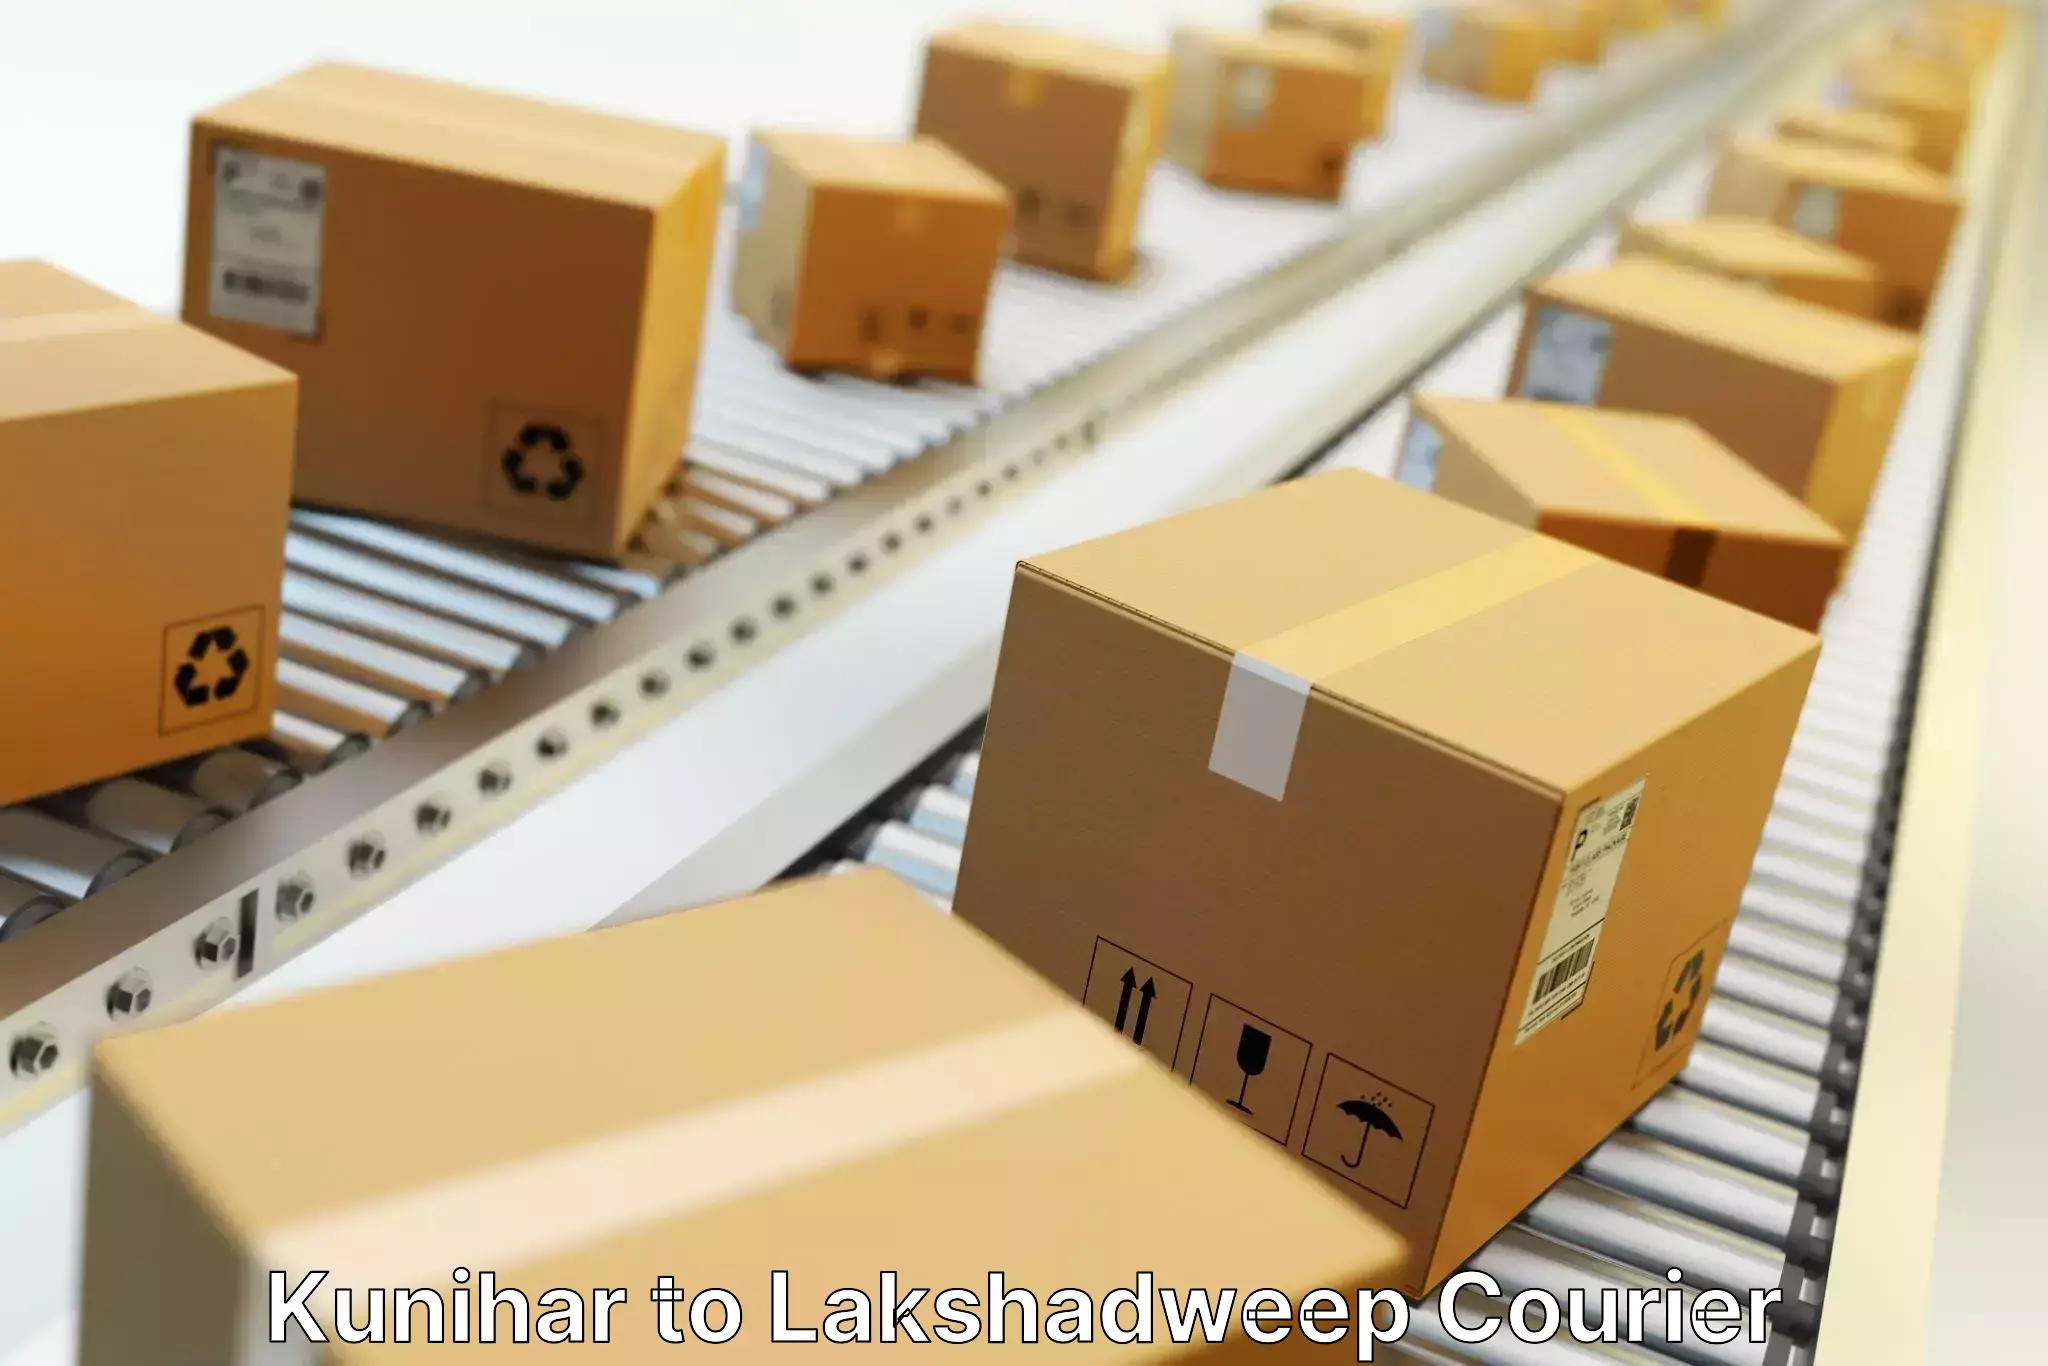 Optimized delivery routes in Kunihar to Lakshadweep